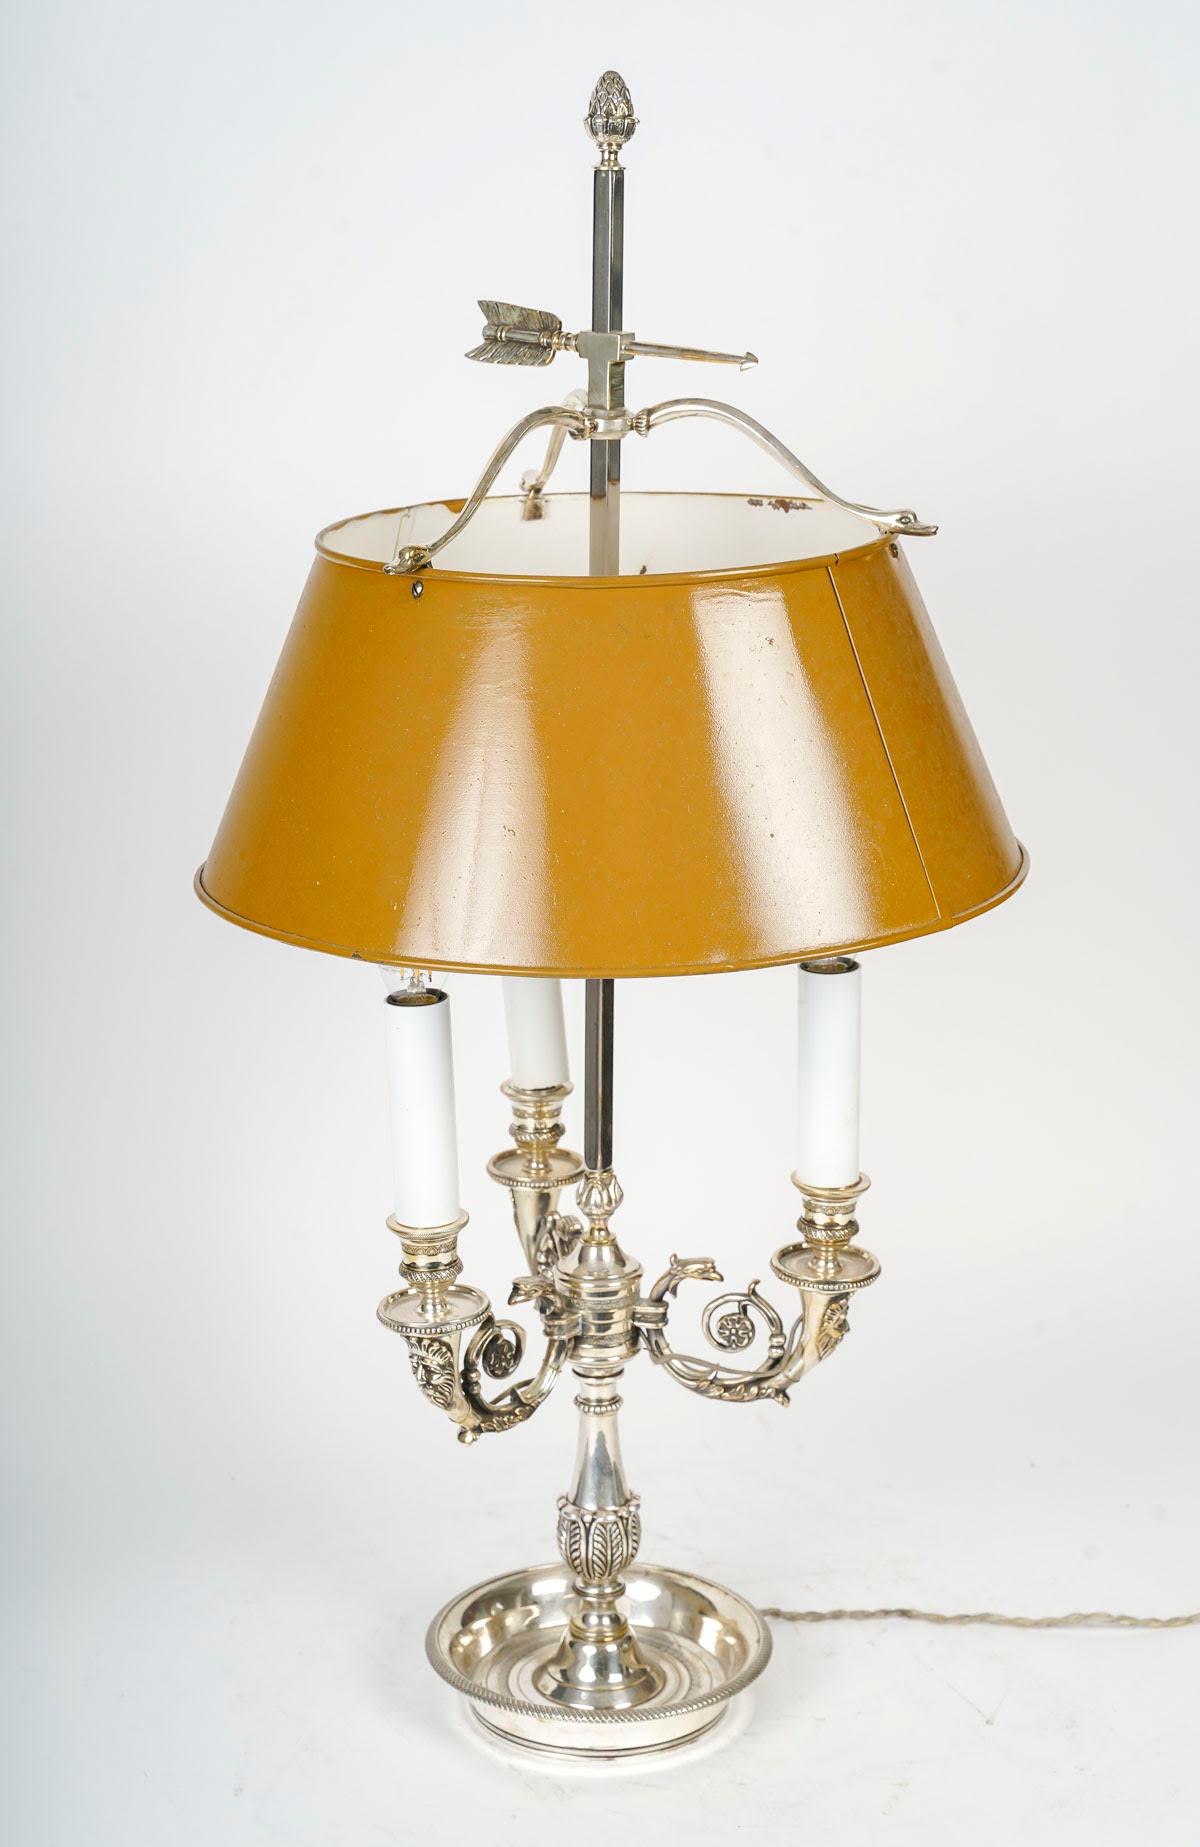 Large Bouillotte lamp in silver plated bronze, 19th century, Napoleon III period.

Large silvered bronze bouillotte lamp, light brown painted sheet metal lampshade, 19th century, Napoleon III period, 3 arms of lights.
h: 76 cm, d: 37cm